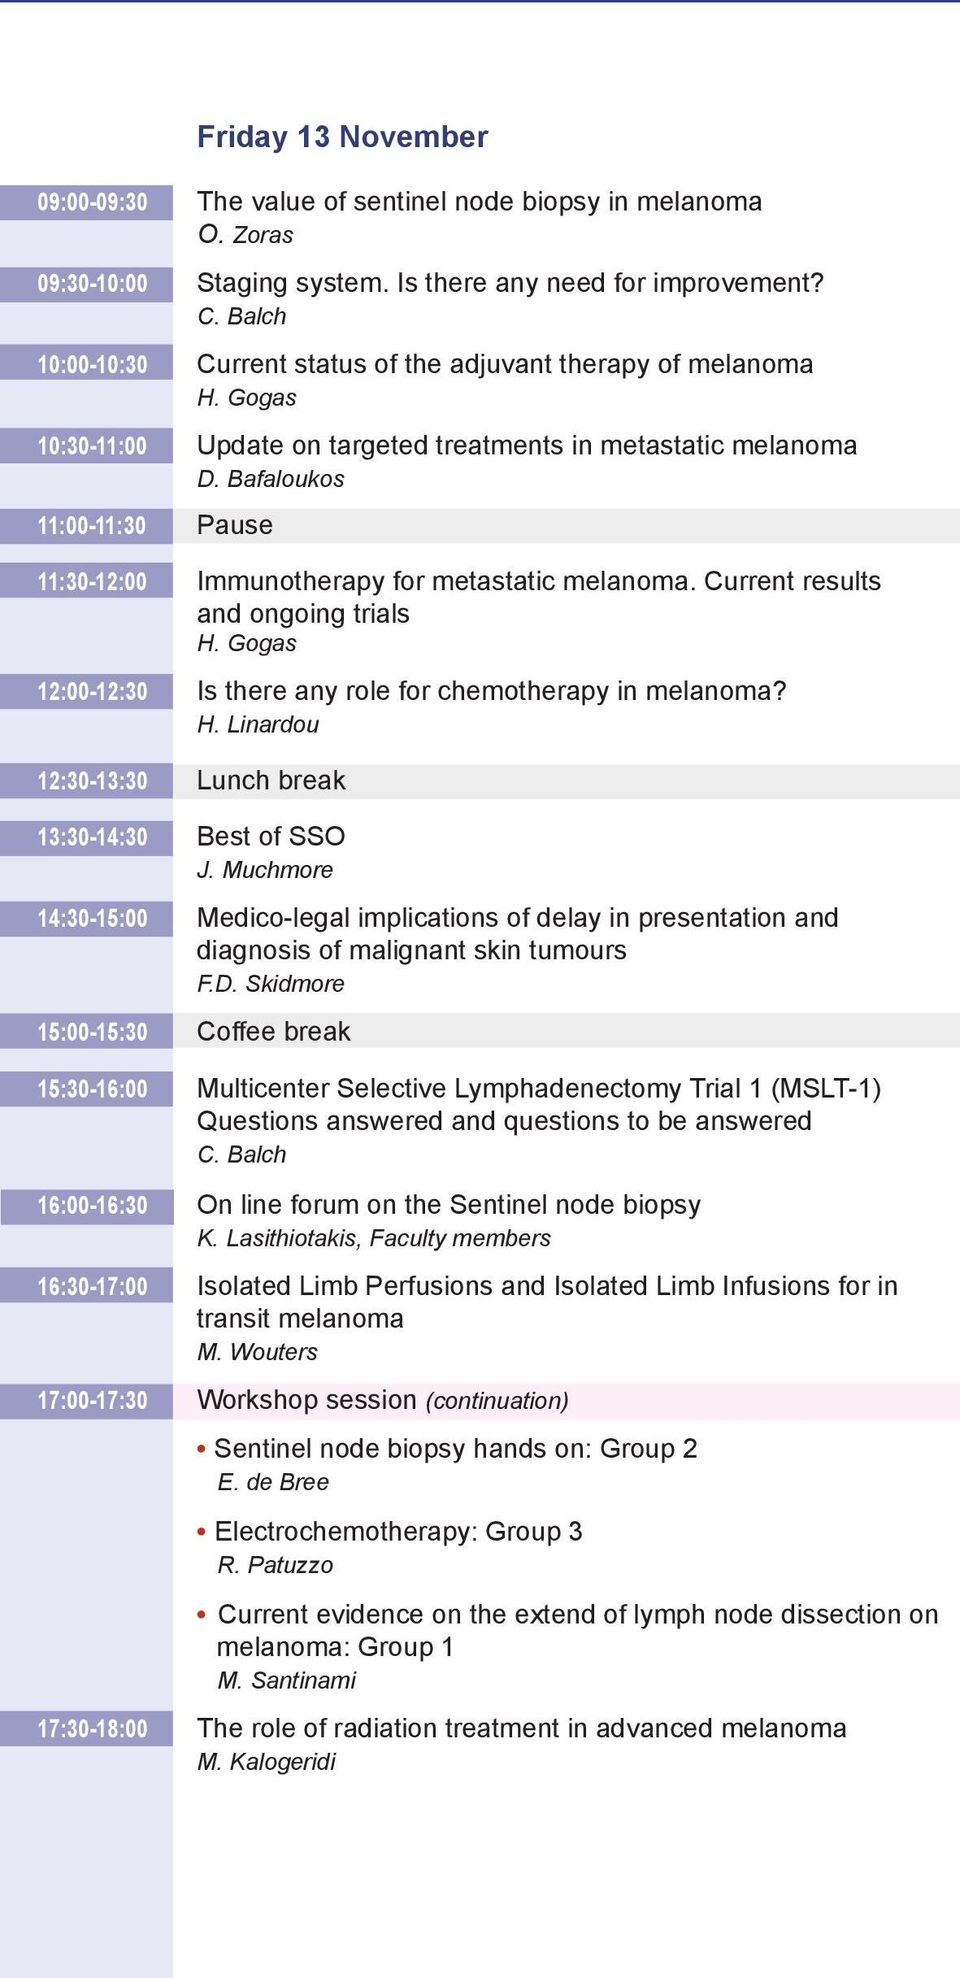 Bafaloukos 11:00-11:30 Pause 11:30-12:00 Immunotherapy for metastatic melanoma. Current results and ongoing trials H. Gogas 12:00-12:30 Is there any role for chemotherapy in melanoma? H. Linardou 12:30-13:30 Lunch break 13:30-14:30 Best of SSO J.